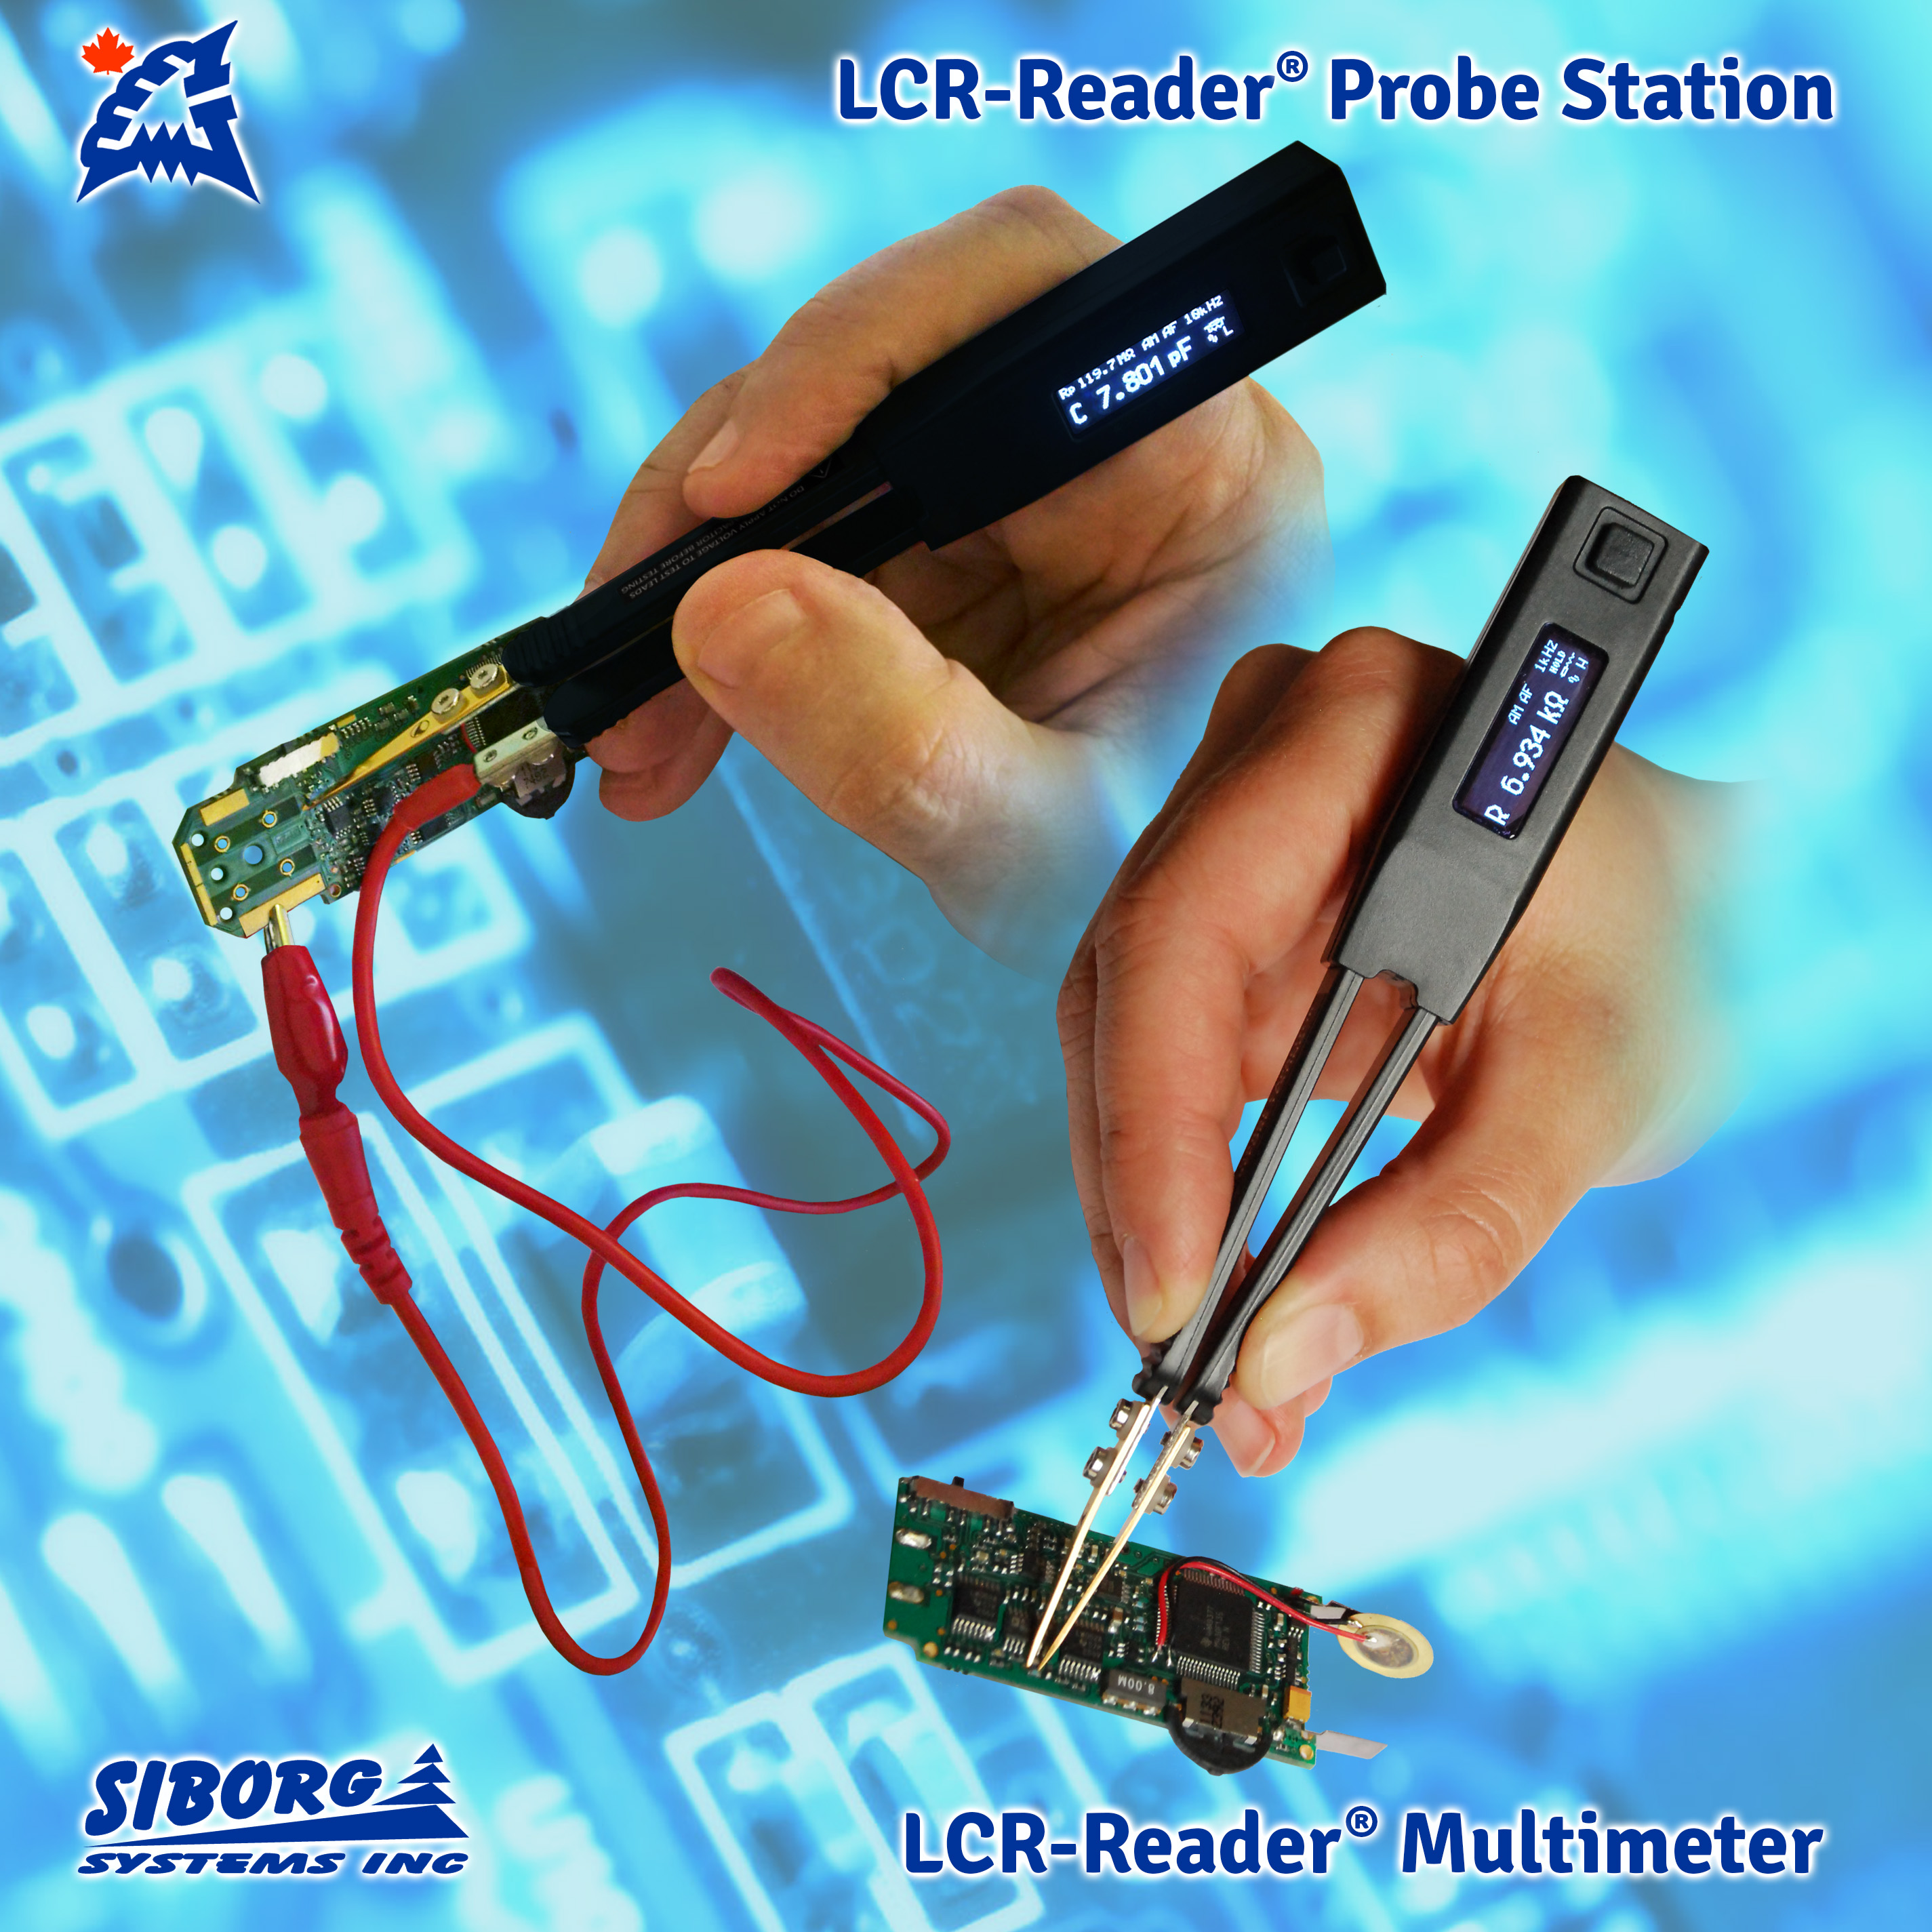 LCR-Reader and the Probe Connector